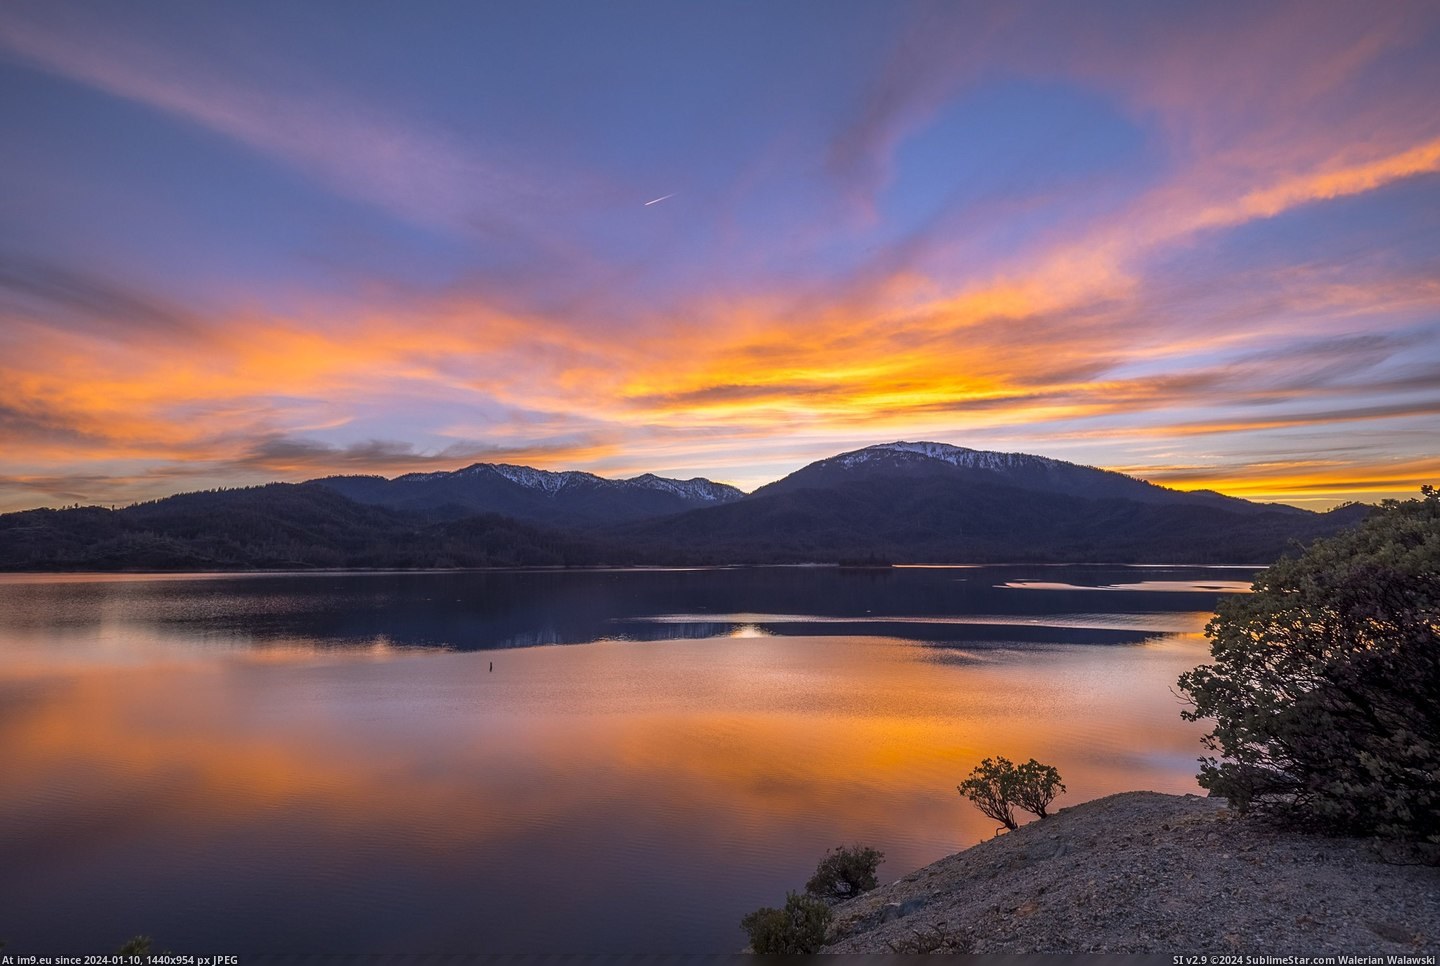 #Night #Pretty #Lake #3000x2000 #Phenomenal #California #Sunset #Northern [Earthporn] Last night's sunset over Whiskeytown Lake in Northern California was pretty phenomenal. [3000x2000] Pic. (Image of album My r/EARTHPORN favs))